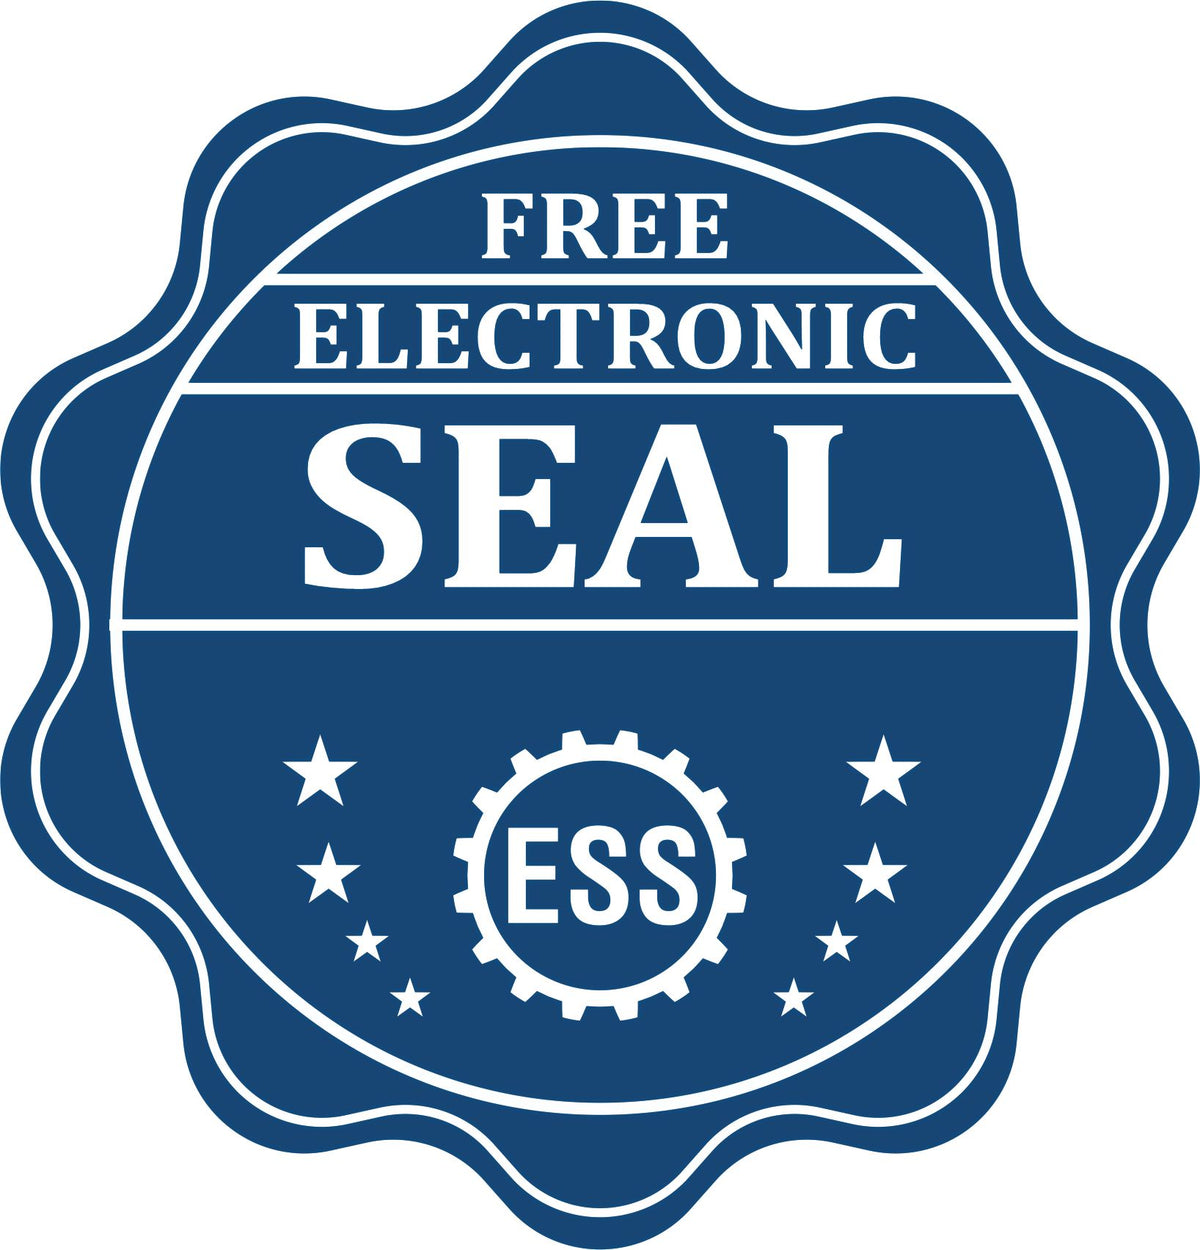 A badge showing a free electronic seal for the Heavy Duty Cast Iron New Hampshire Architect Embosser with stars and the ESS gear on the emblem.